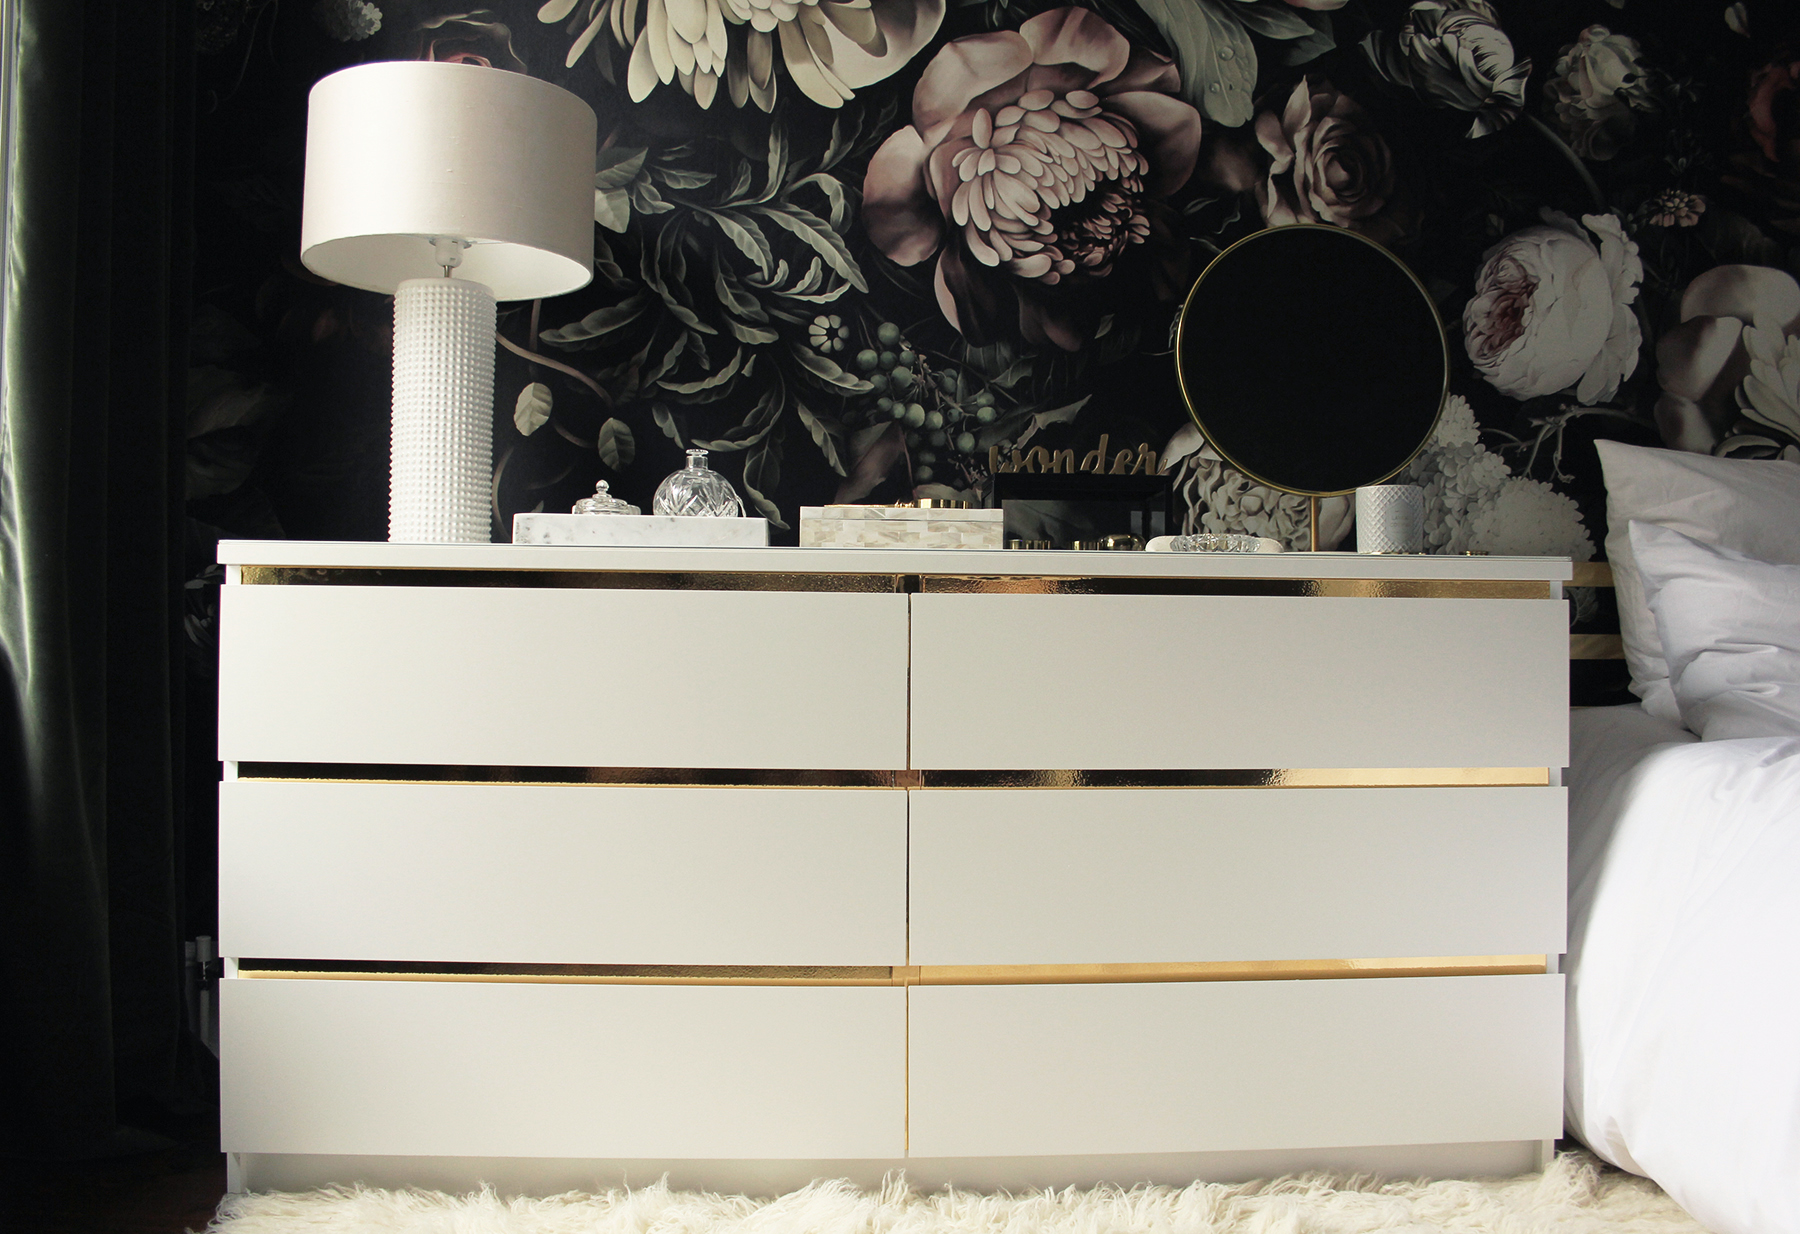 Preciously Me blog : DIY - Ikea Hack, Customize and Glamorize a Malm dresser with gold contact paper